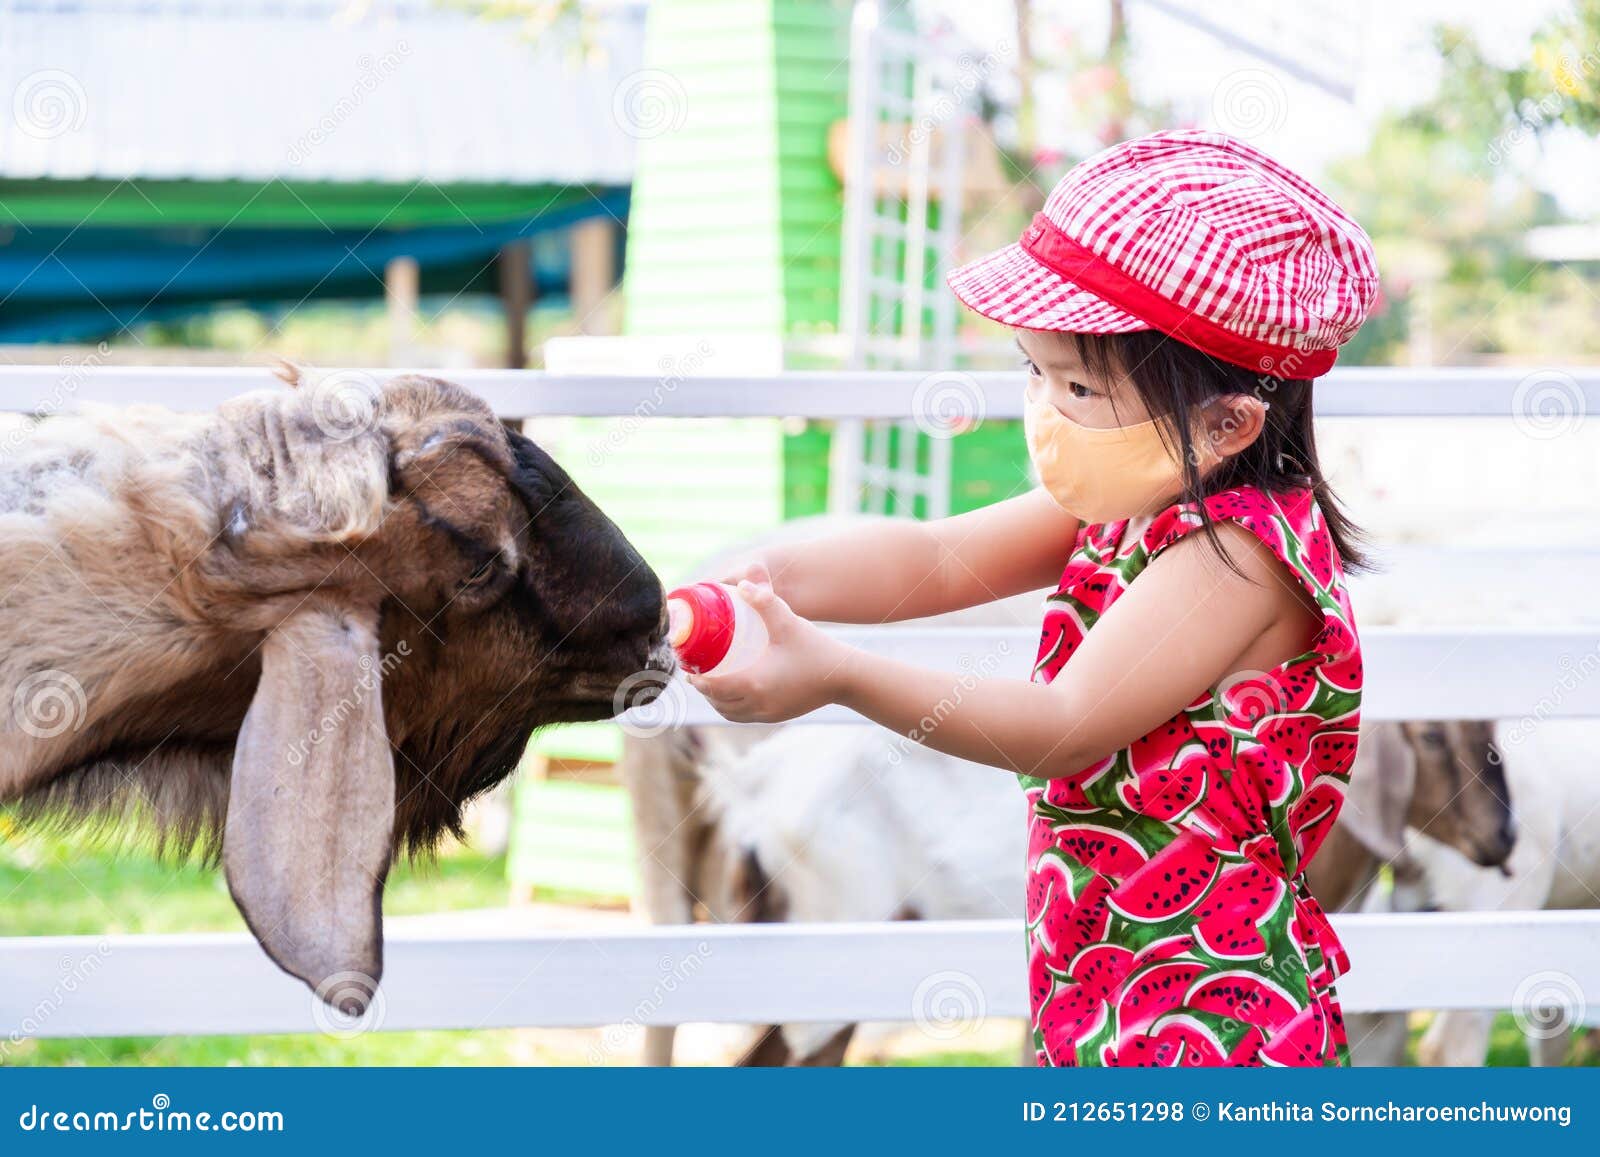 Cute Girl Wearing Face Mask is Feeding Milk the Animals. Kid Wearing Hat To  Protect the Sun from the Heat Stock Photo - Image of animal, milk: 212651298